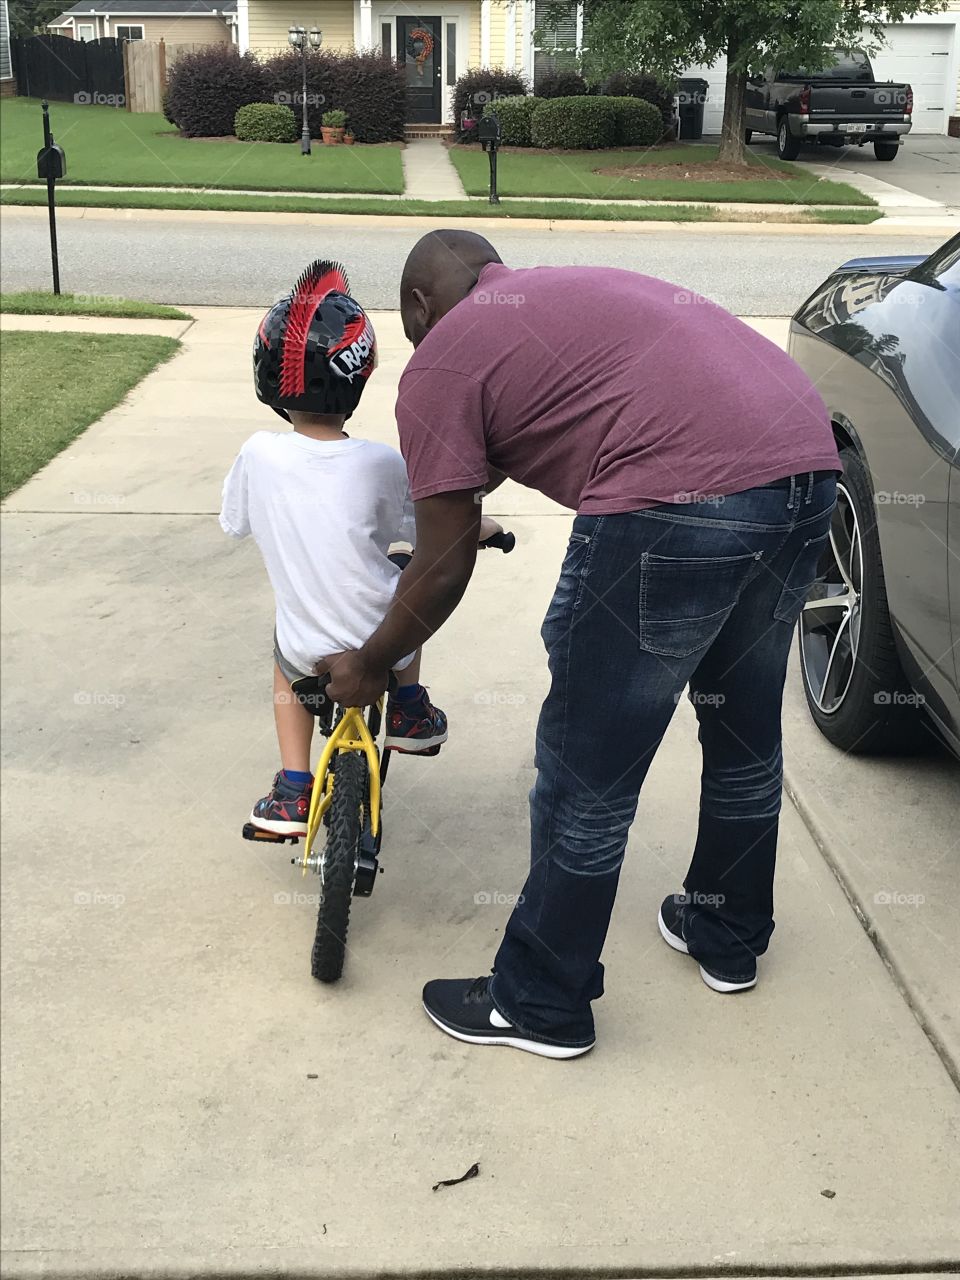 Teaching young boy to ride his bike without training wheels